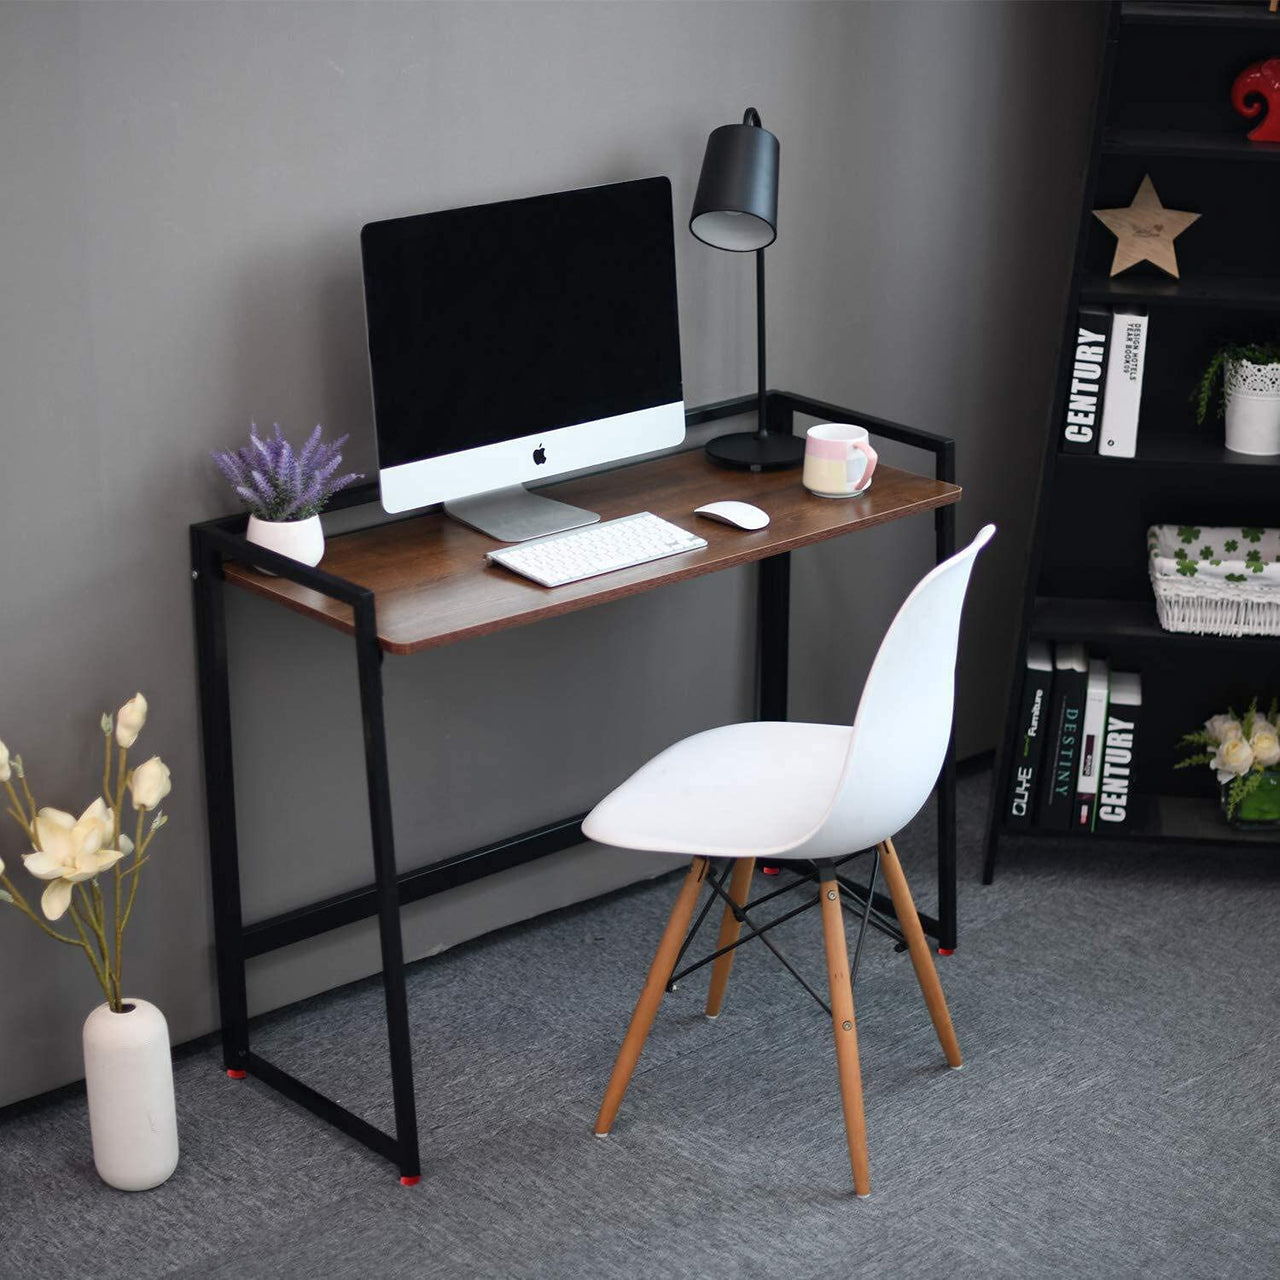 Portable and Foldable Study Table for Home and Office Writing Desk Computer and Laptop Desk Study Desk Made with Engineered Wood and Iron Dime Store